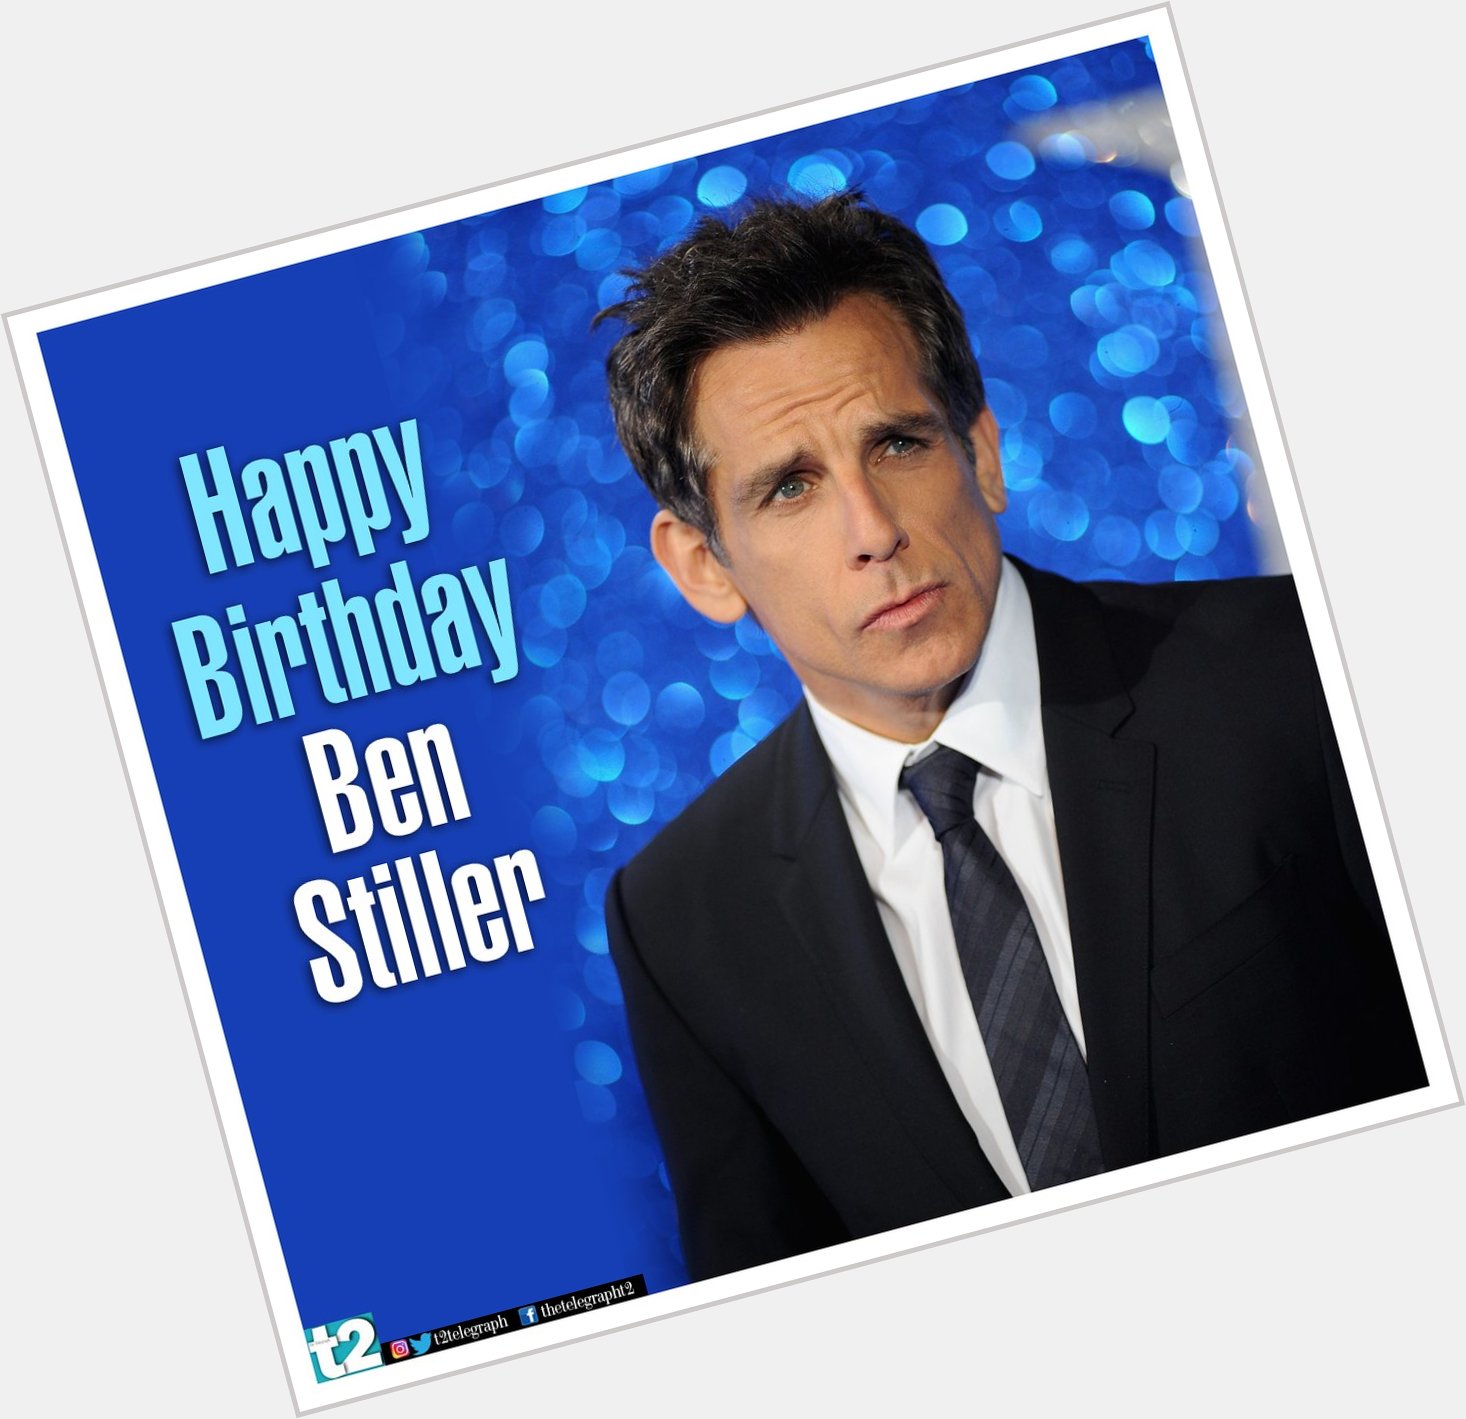 You can count on him to bring on the laughs every time! Happy birthday, Ben Stiller! 